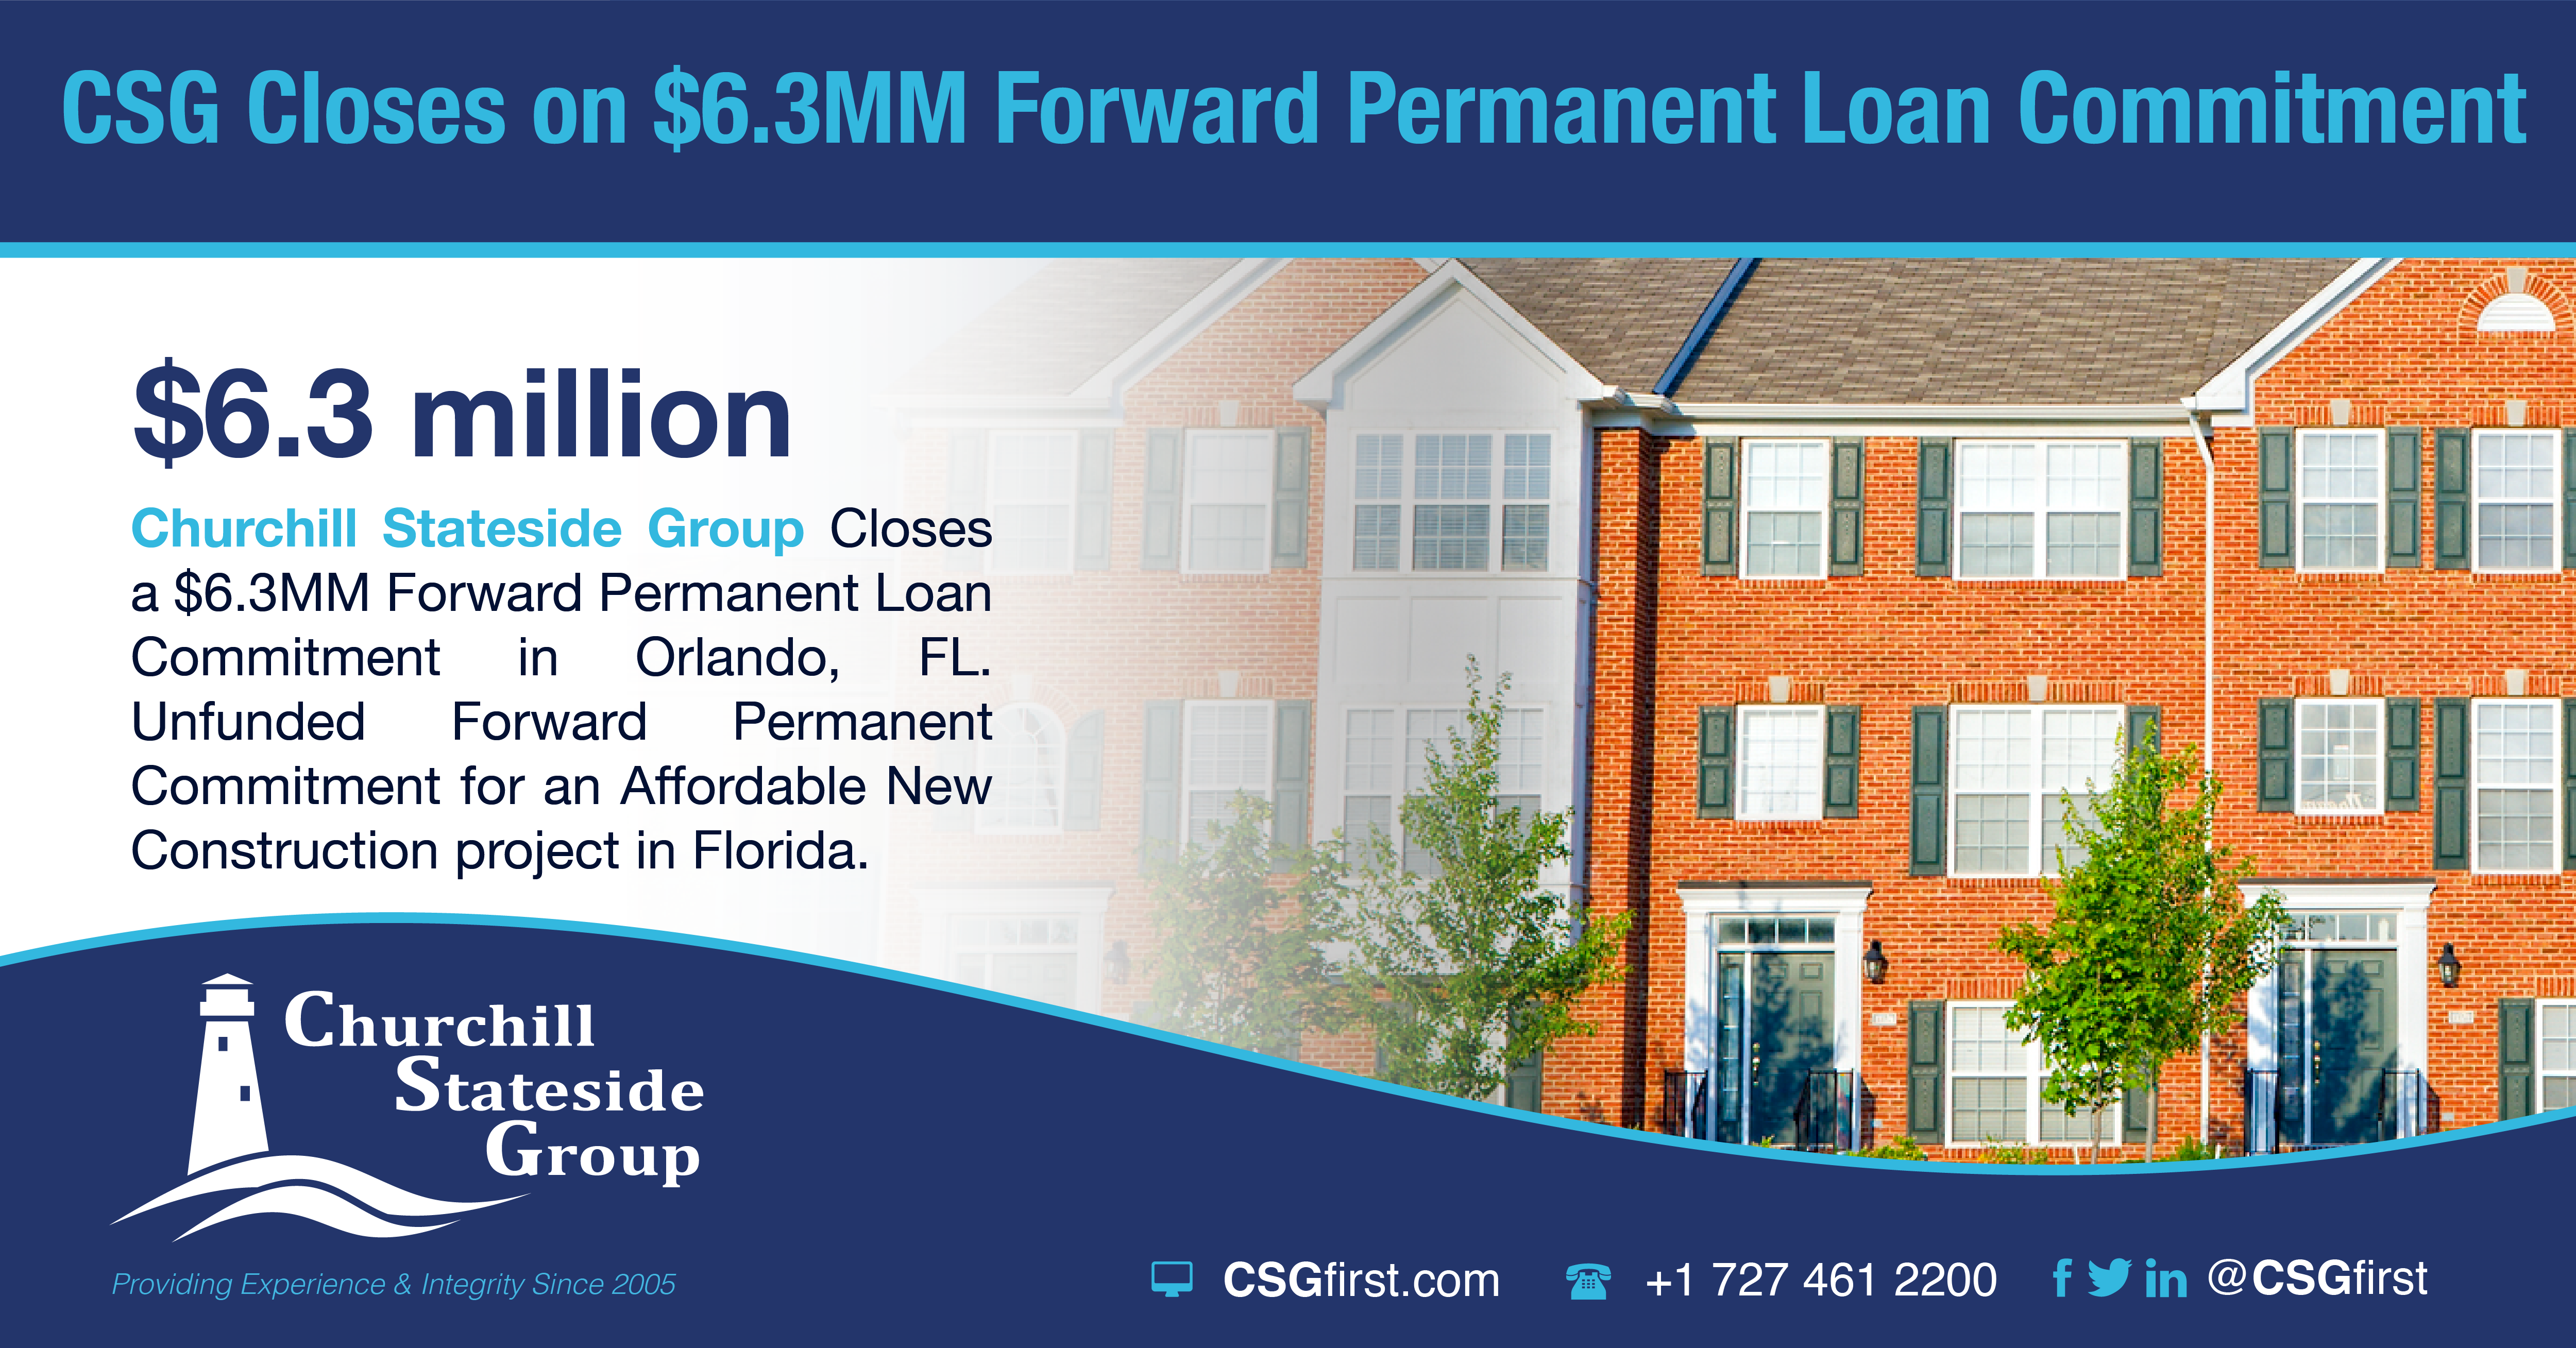 Churchill Stateside Group Closes a $6.3MM Forward Permanent Loan Commitment in Orlando, FL.